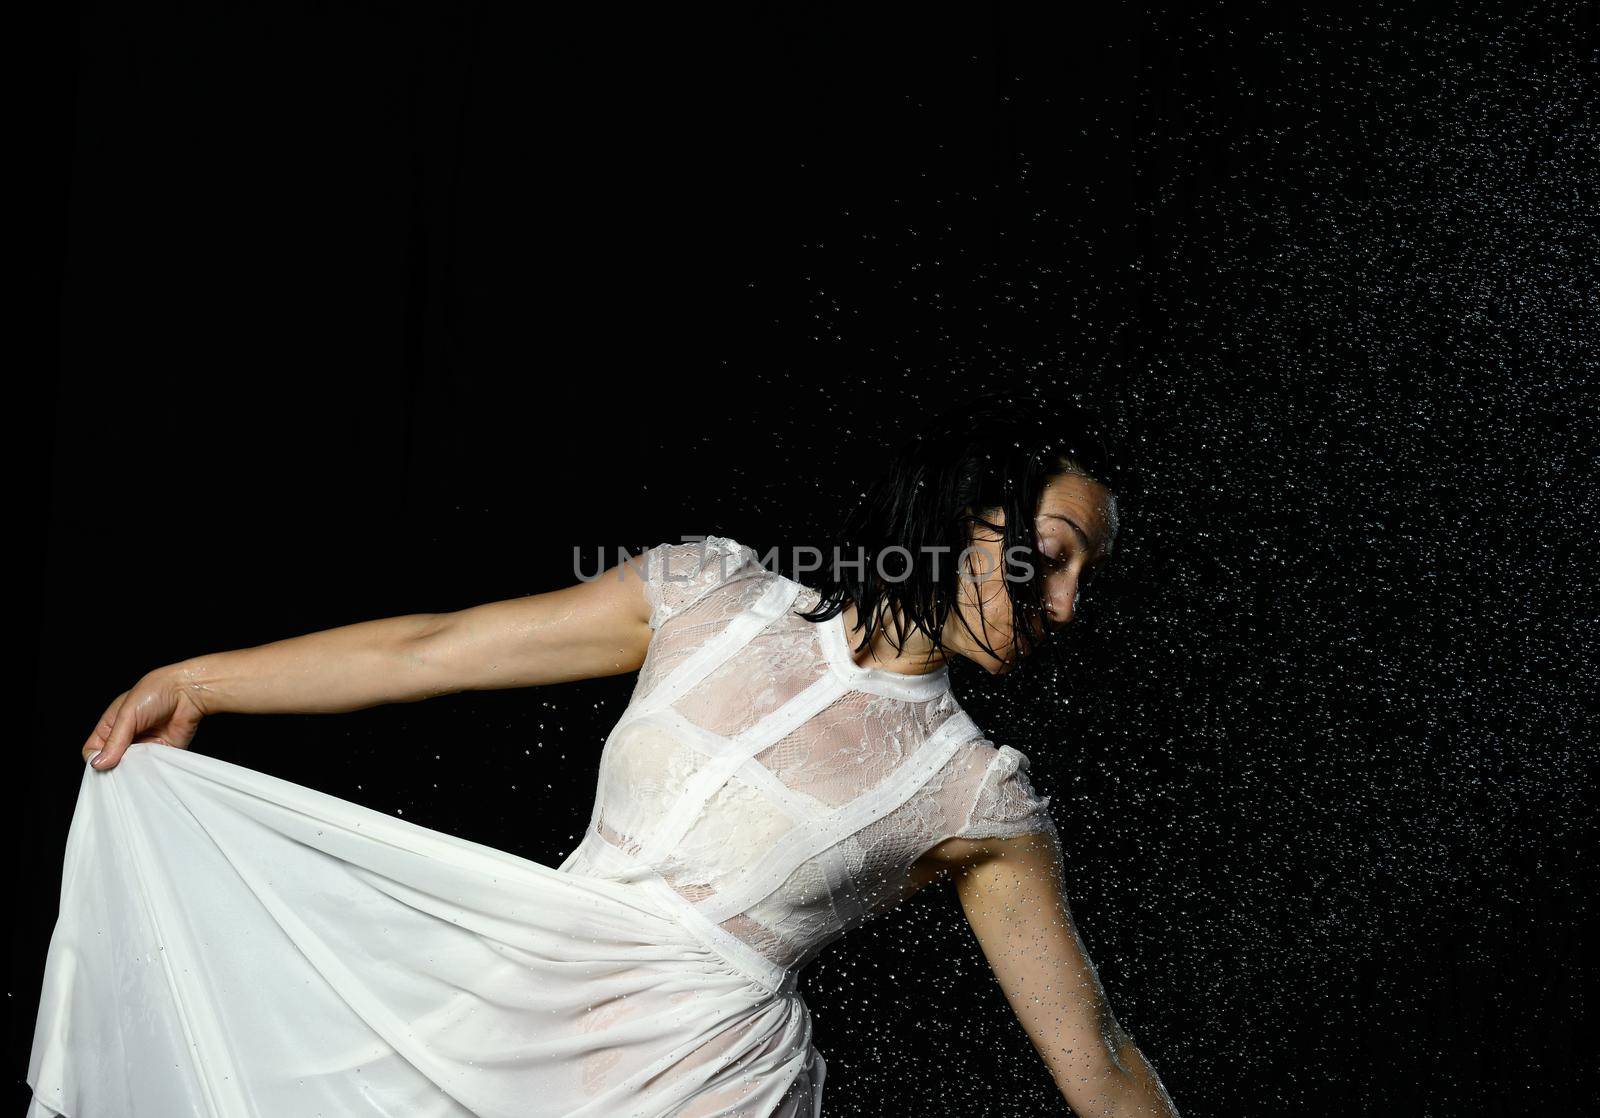 beautiful woman of Caucasian appearance with black hair dances in drops of water on a black background. The woman is wearing a white chiffon dress by ndanko